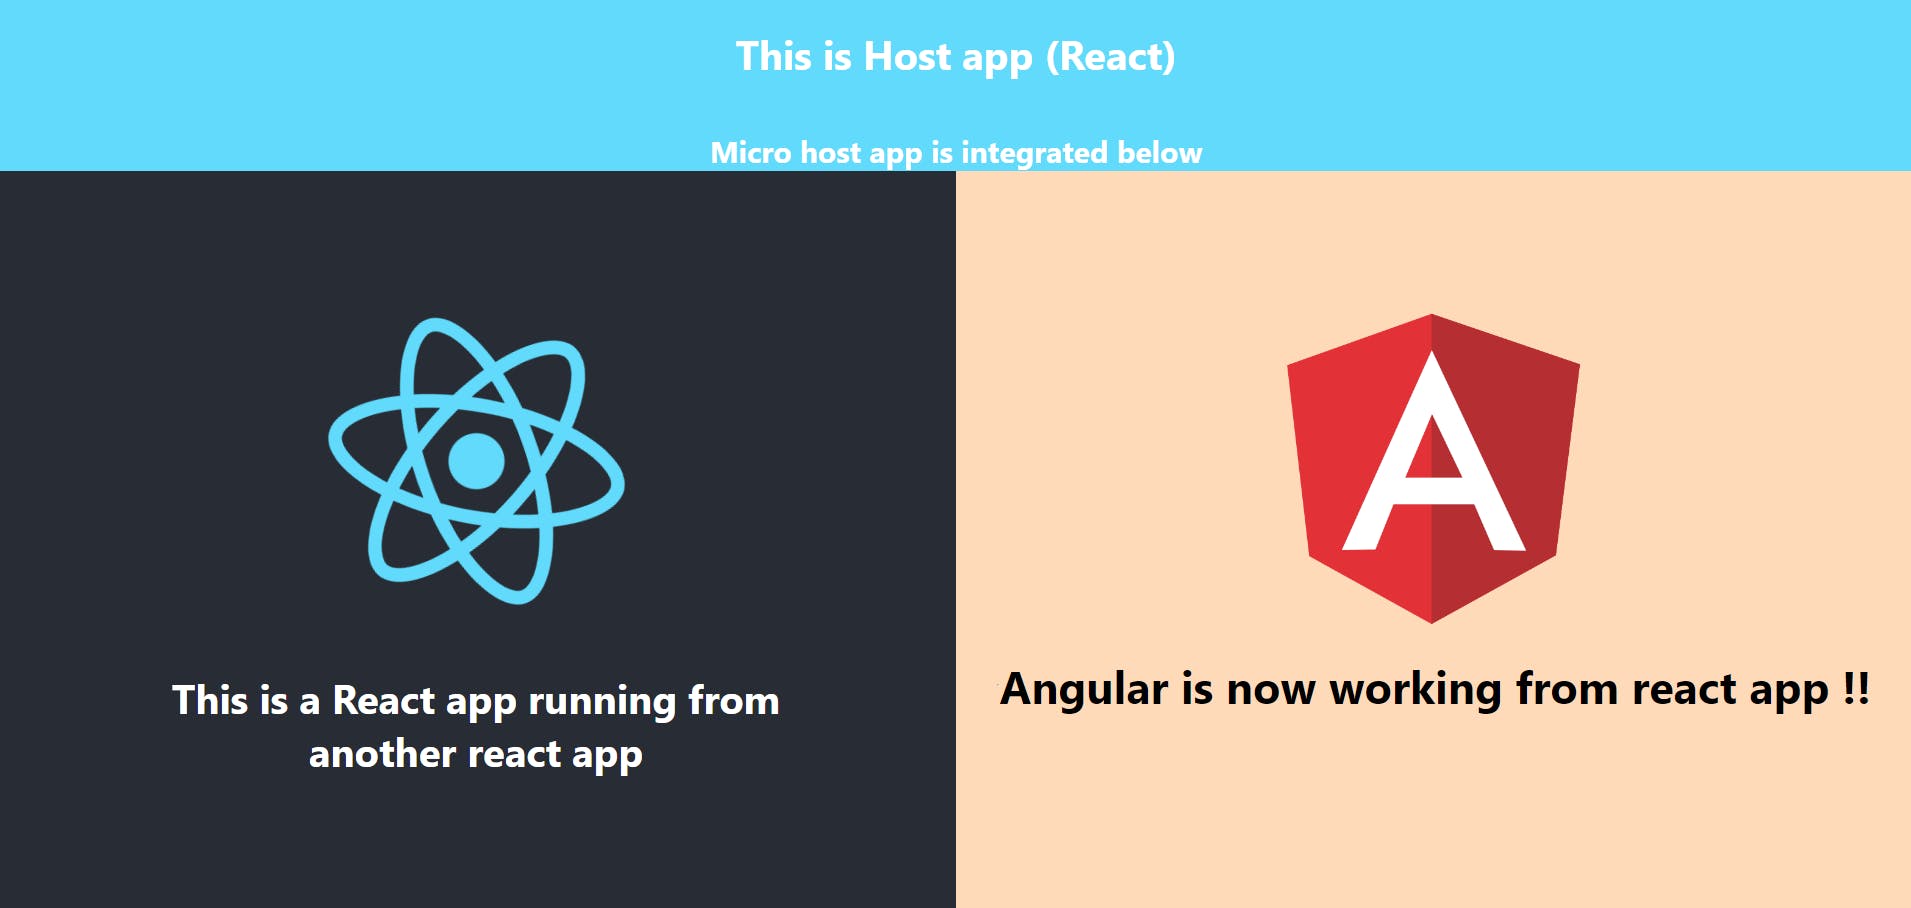 An image capturing the seamless integration of React and Angular micro apps within a dynamic host application